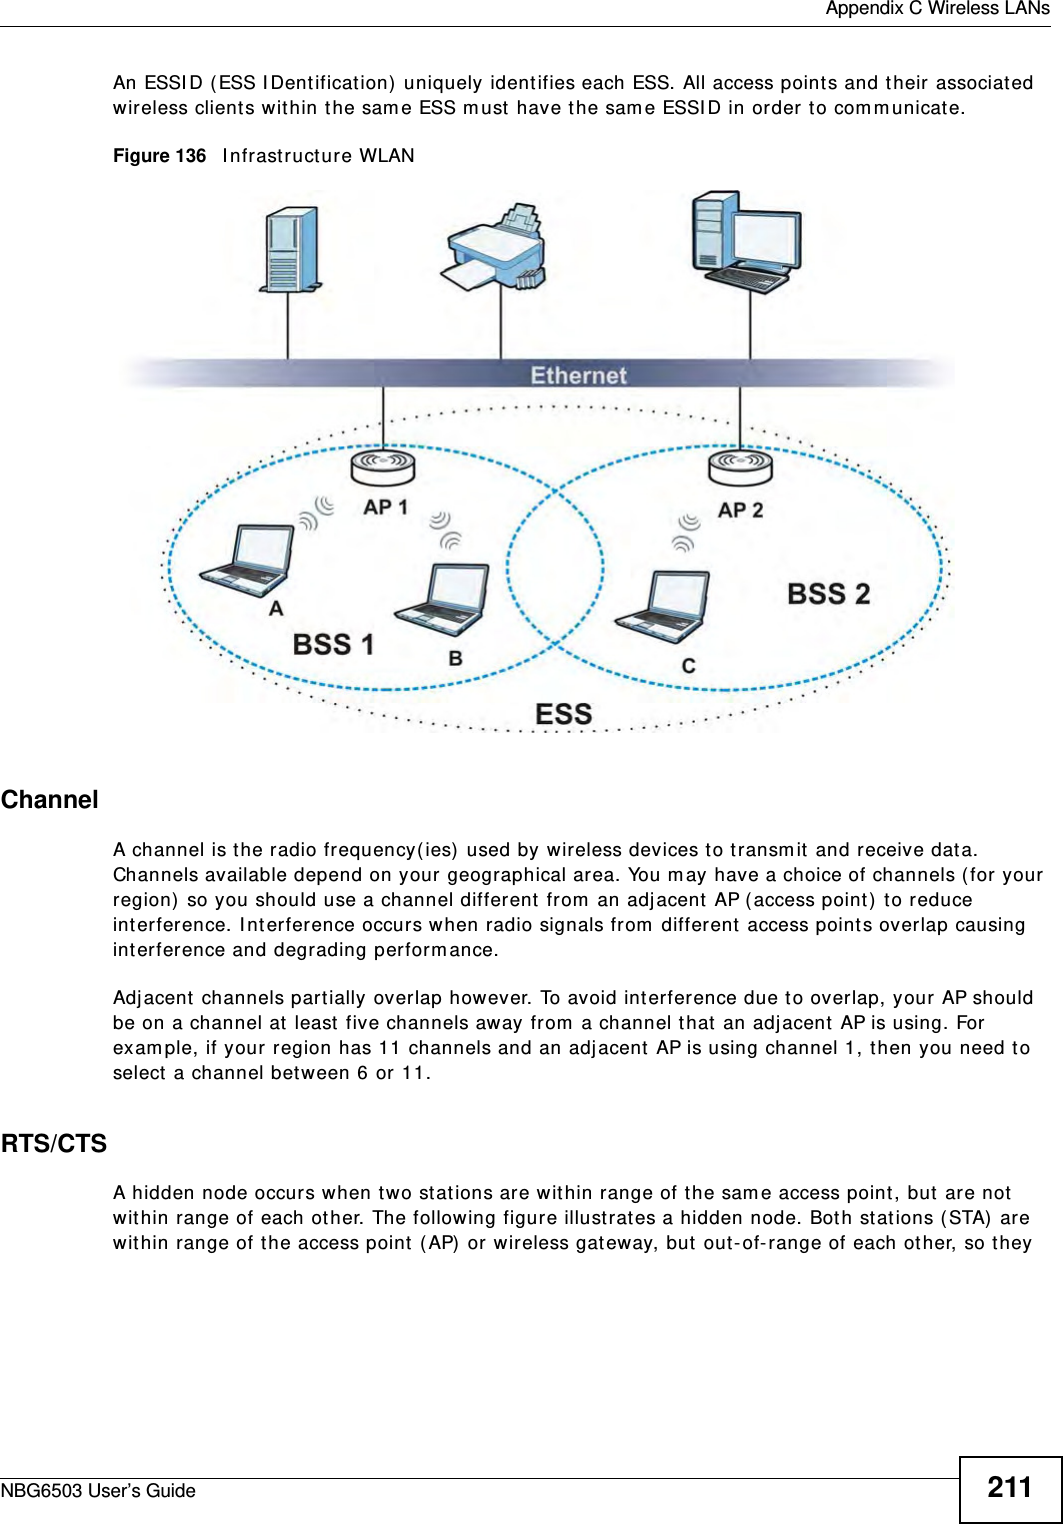  Appendix C Wireless LANsNBG6503 User’s Guide 211An ESSID (ESS IDentification) uniquely identifies each ESS. All access points and their associated wireless clients within the same ESS must have the same ESSID in order to communicate.Figure 136   Infrastructure WLANChannelA channel is the radio frequency(ies) used by wireless devices to transmit and receive data. Channels available depend on your geographical area. You may have a choice of channels (for your region) so you should use a channel different from an adjacent AP (access point) to reduce interference. Interference occurs when radio signals from different access points overlap causing interference and degrading performance.Adjacent channels partially overlap however. To avoid interference due to overlap, your AP should be on a channel at least five channels away from a channel that an adjacent AP is using. For example, if your region has 11 channels and an adjacent AP is using channel 1, then you need to select a channel between 6 or 11.RTS/CTSA hidden node occurs when two stations are within range of the same access point, but are not within range of each other. The following figure illustrates a hidden node. Both stations (STA) are within range of the access point (AP) or wireless gateway, but out-of-range of each other, so they 